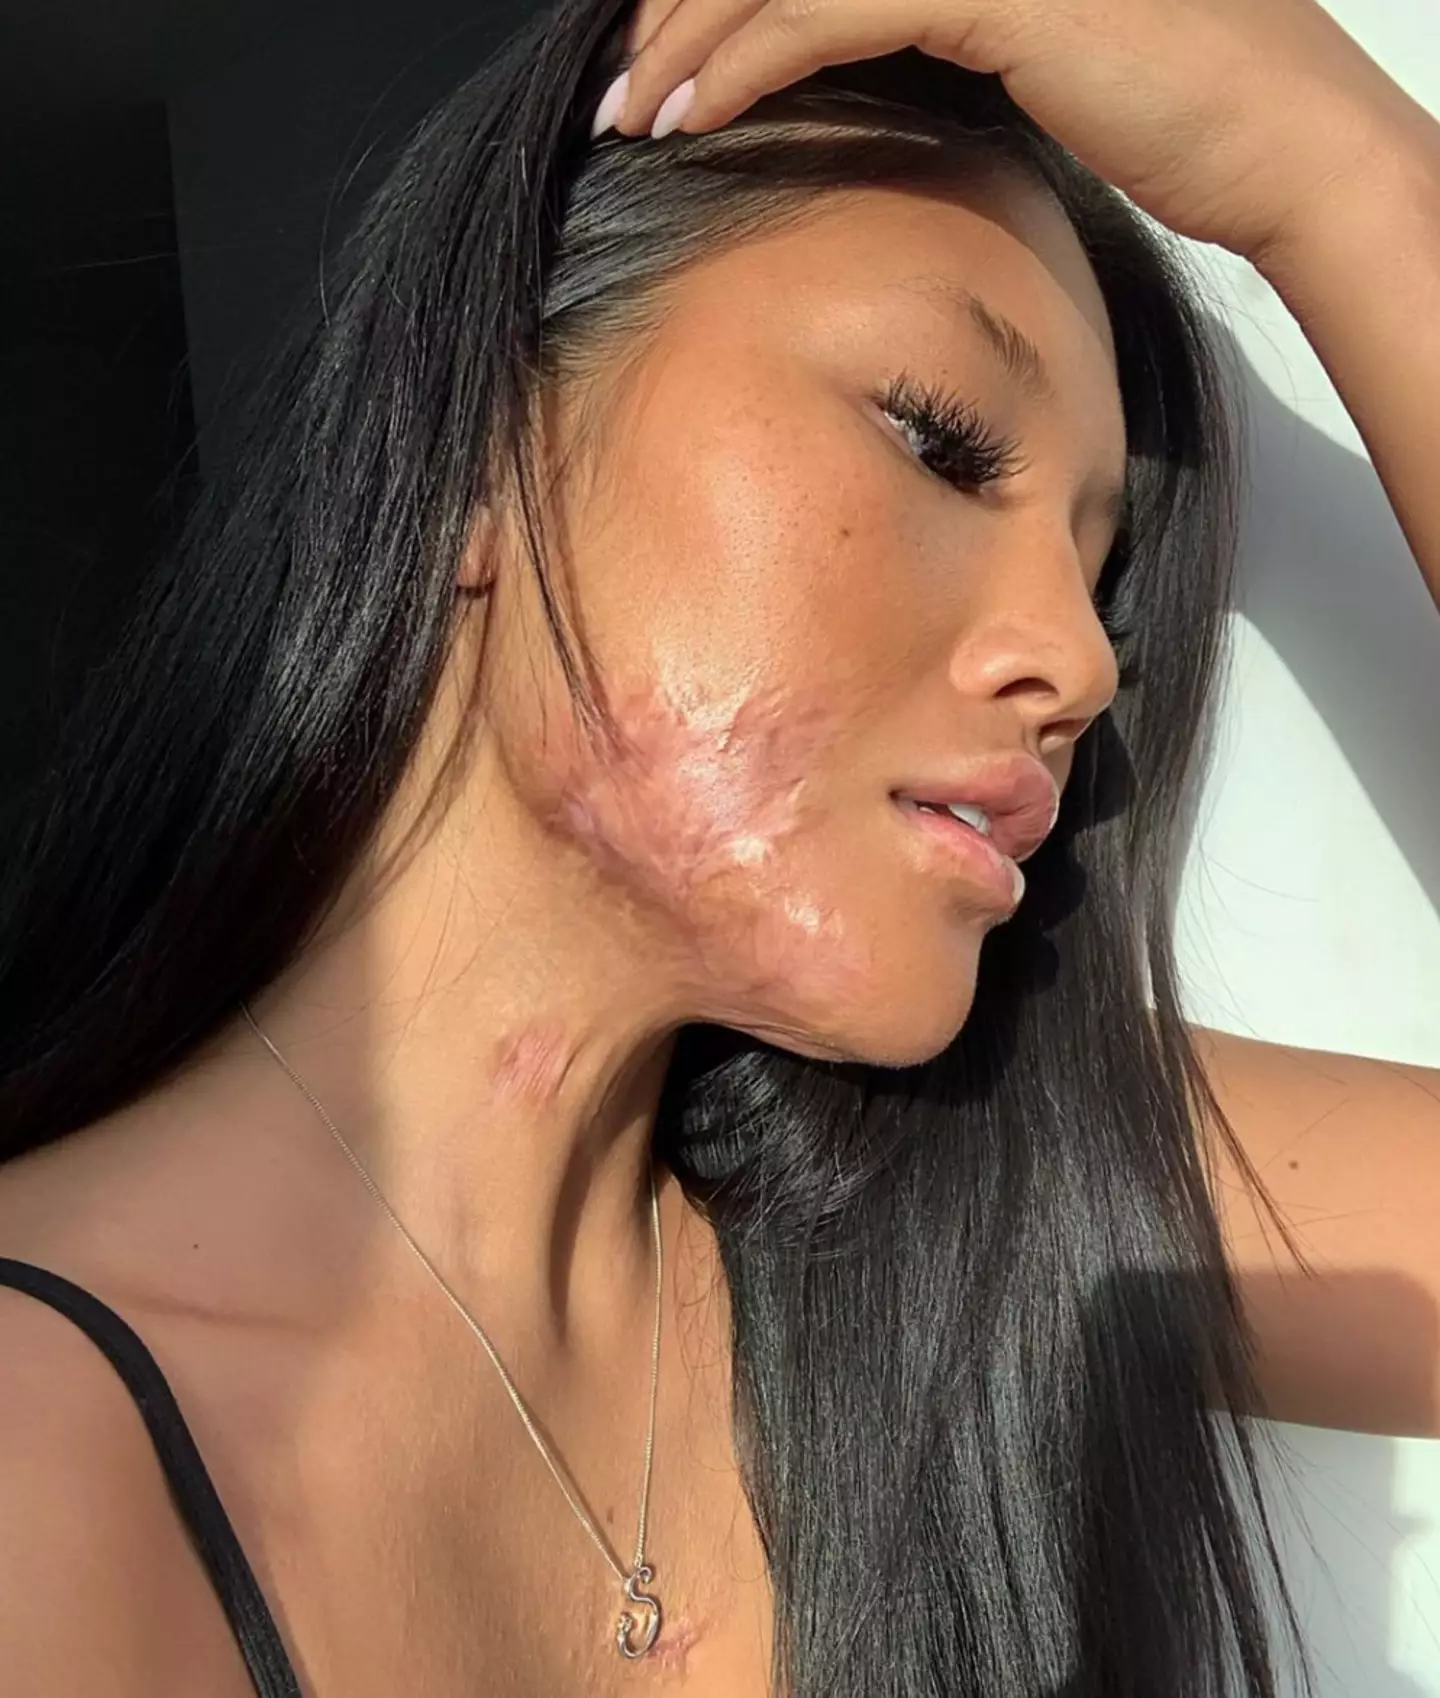 Sophie embraces the beauty of her remaining scars.